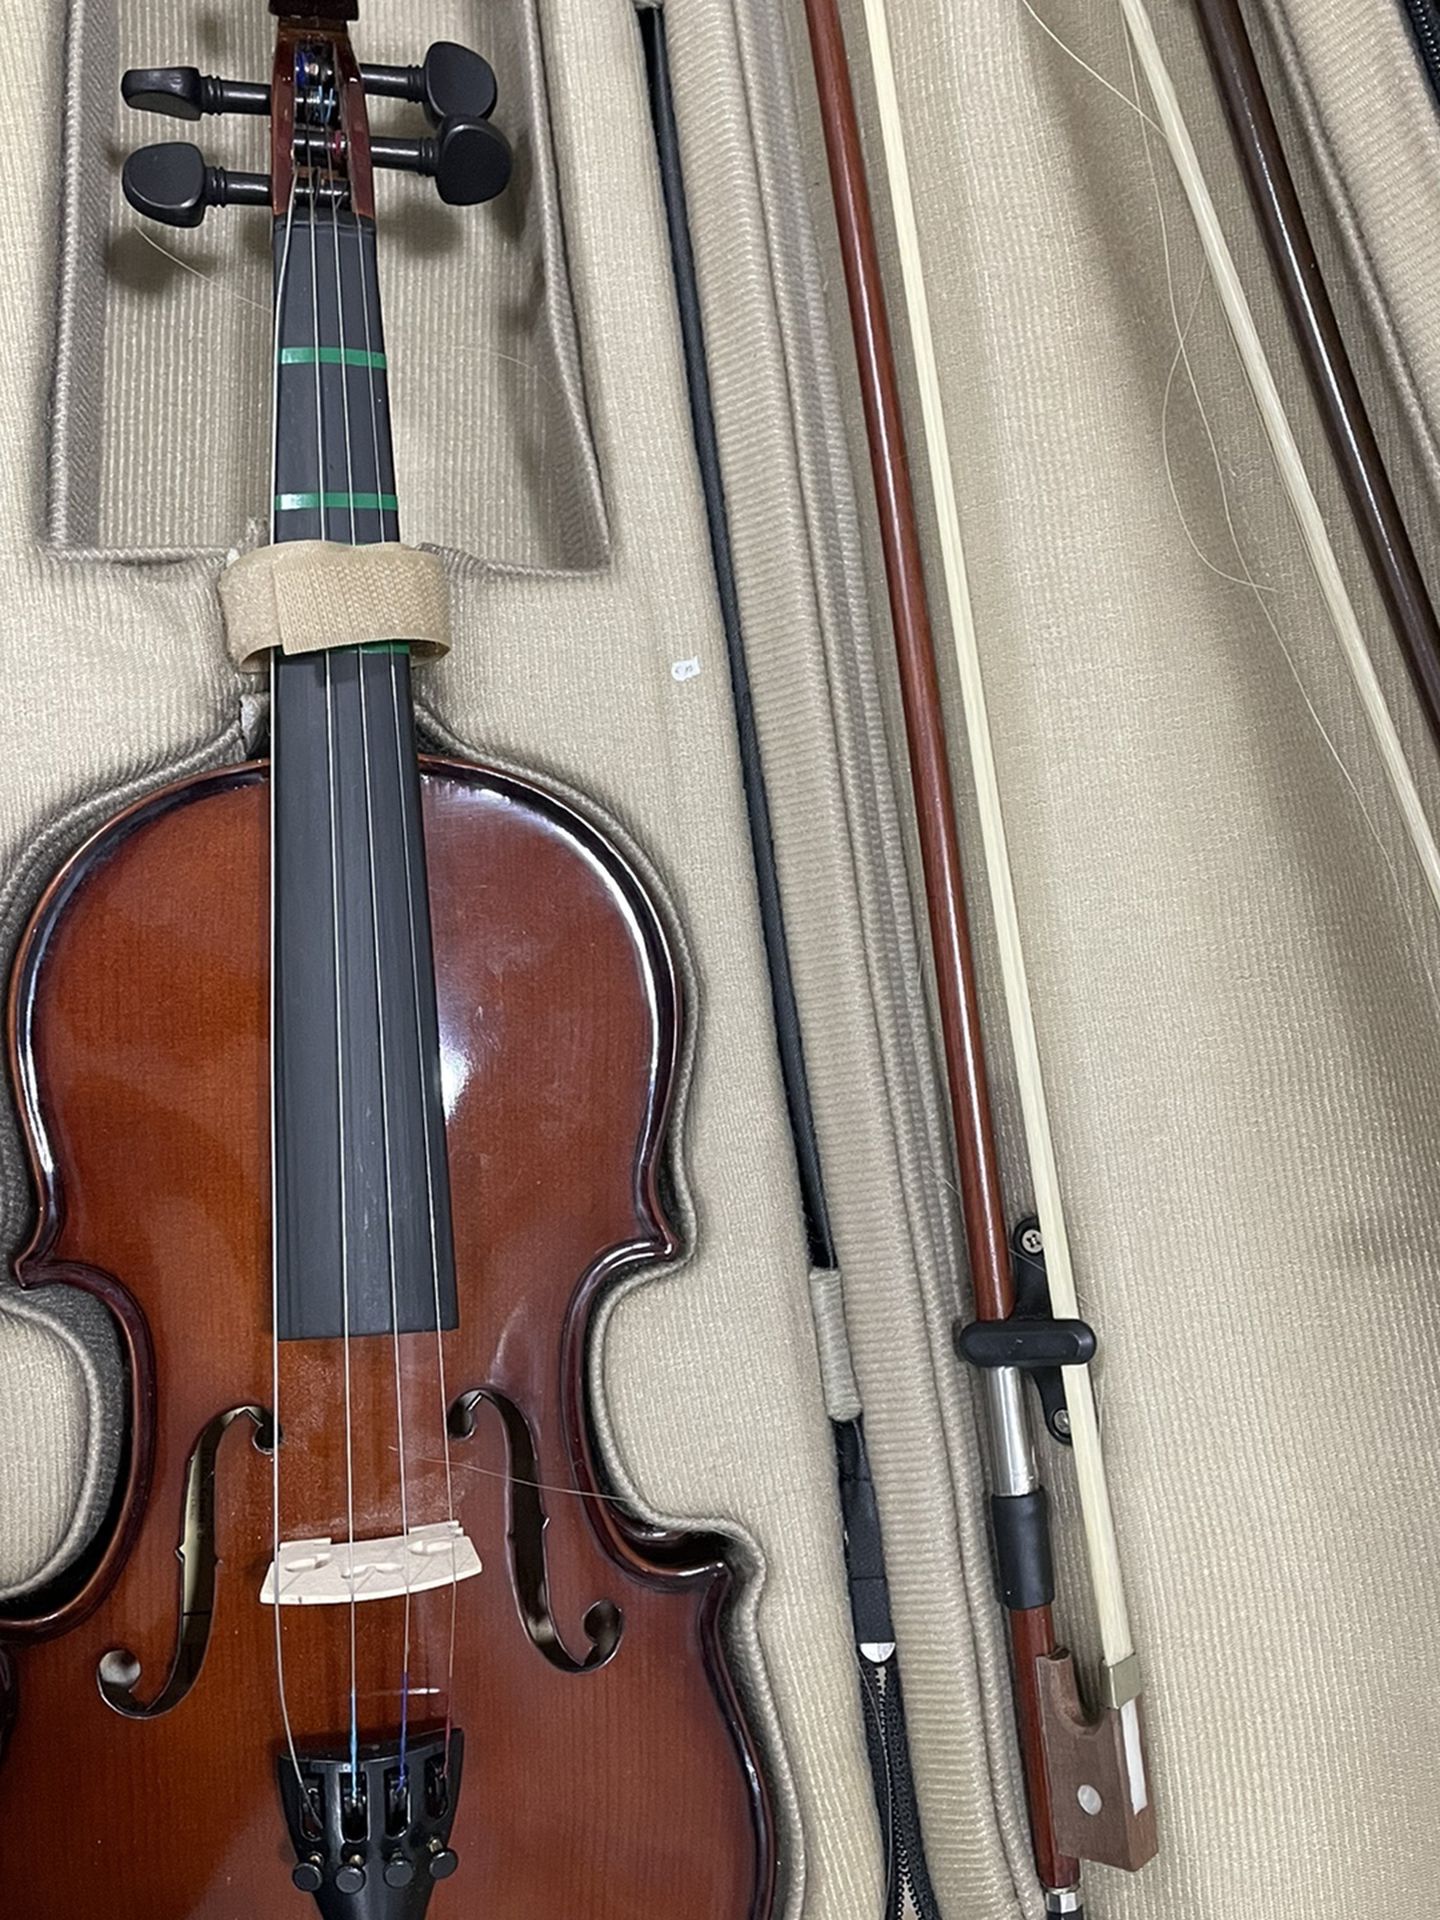 Used violin with case.